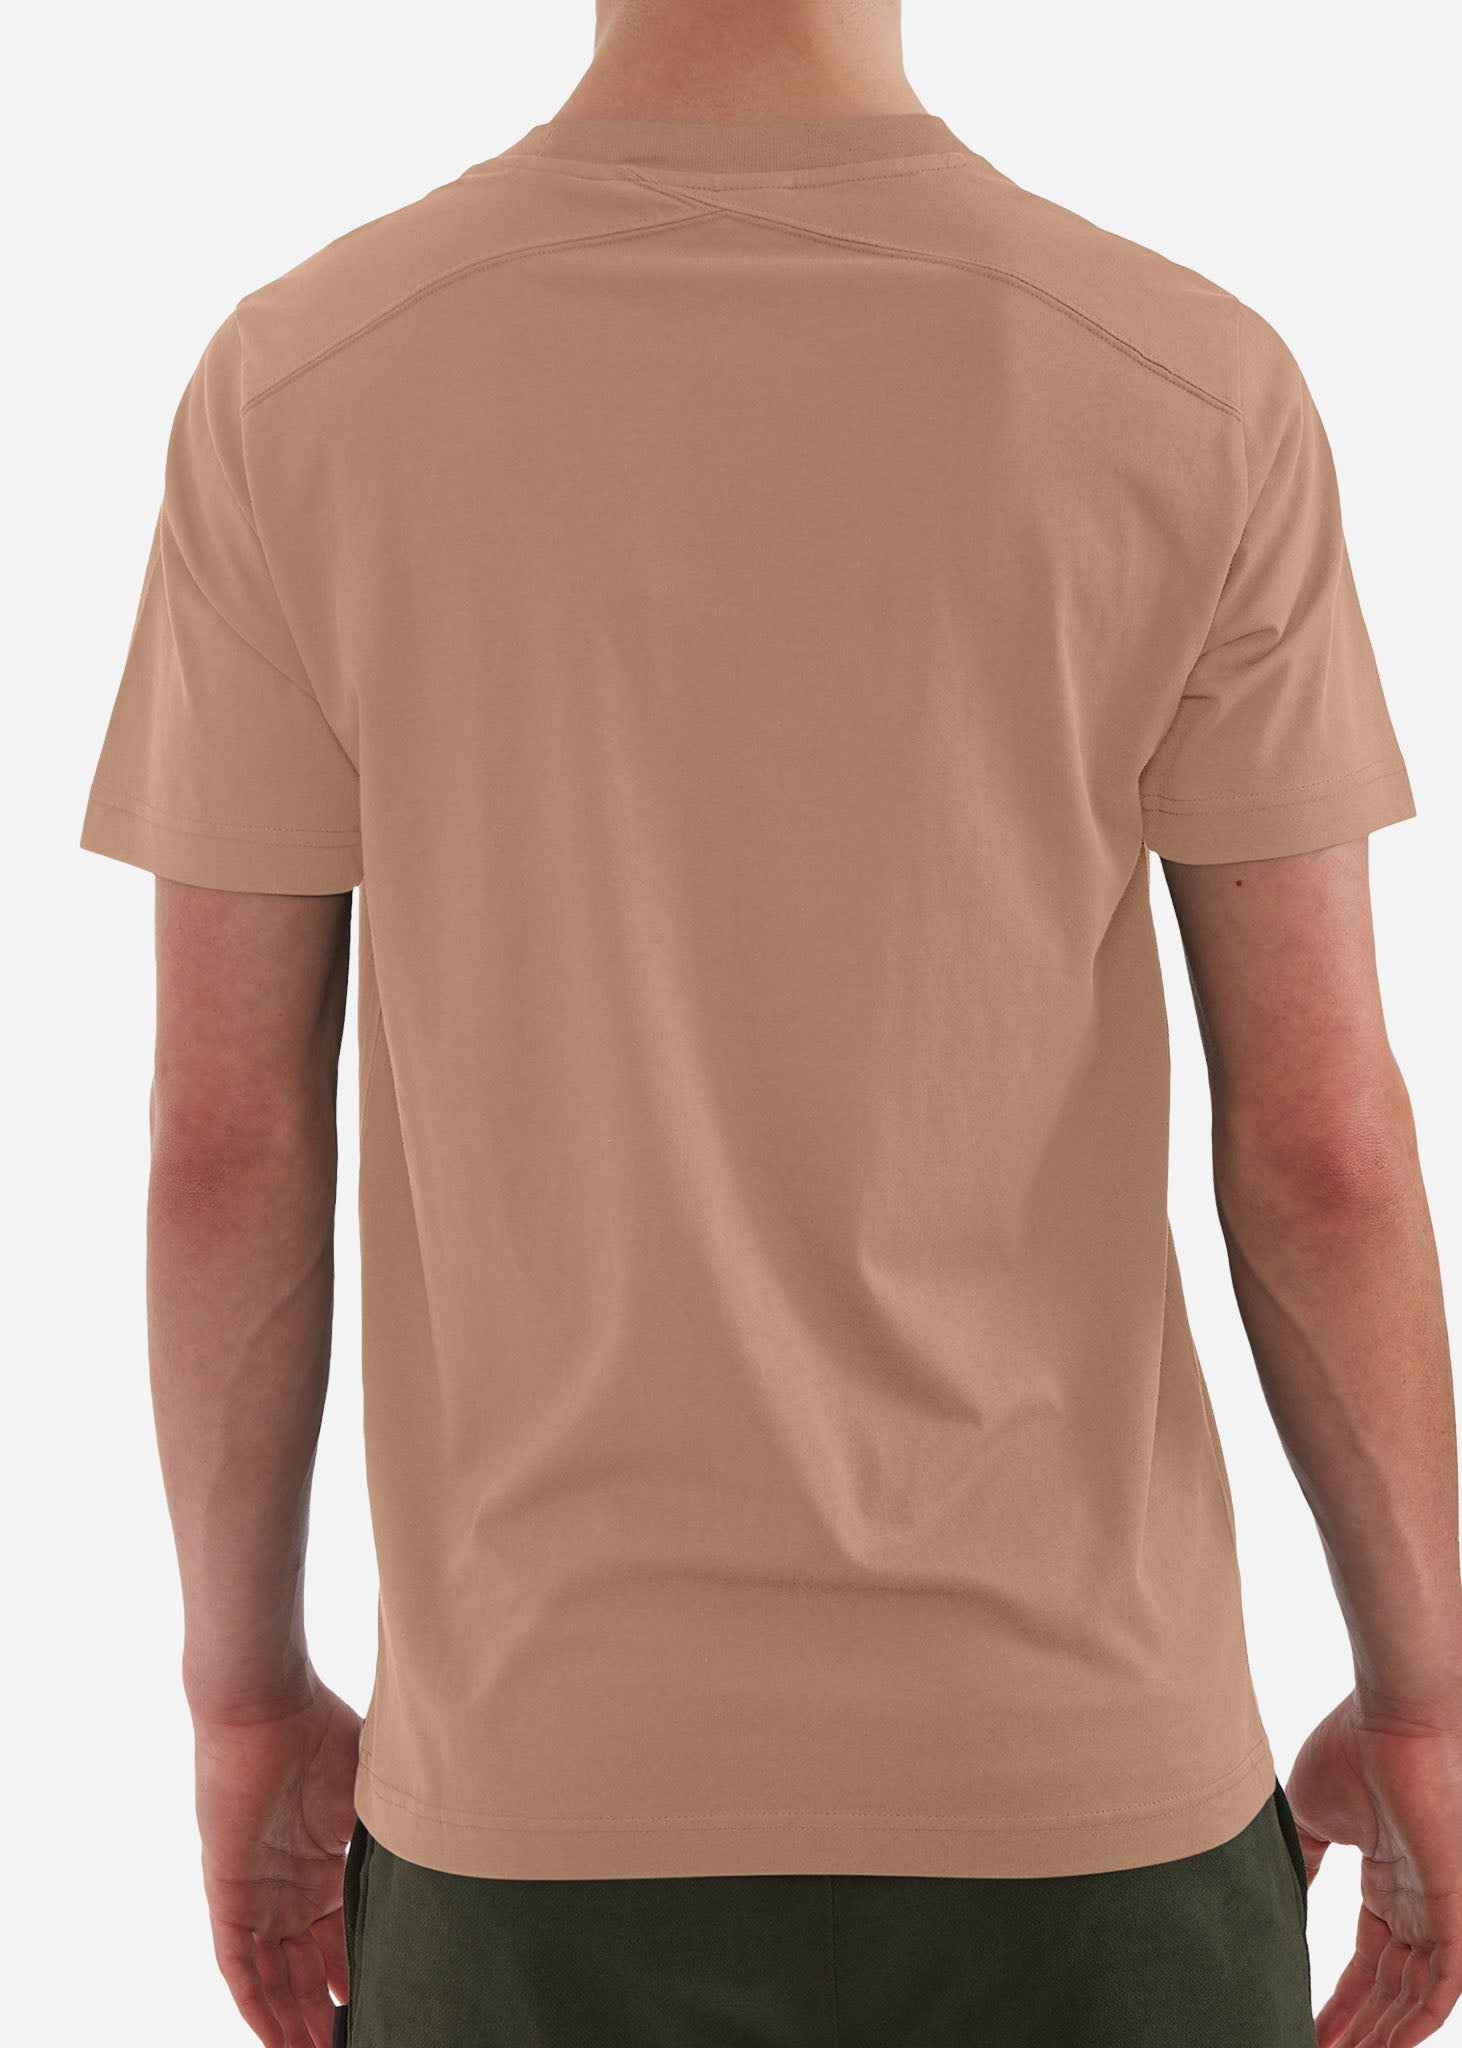 MA.Strum T-shirts  Ss icon tee - army brown 